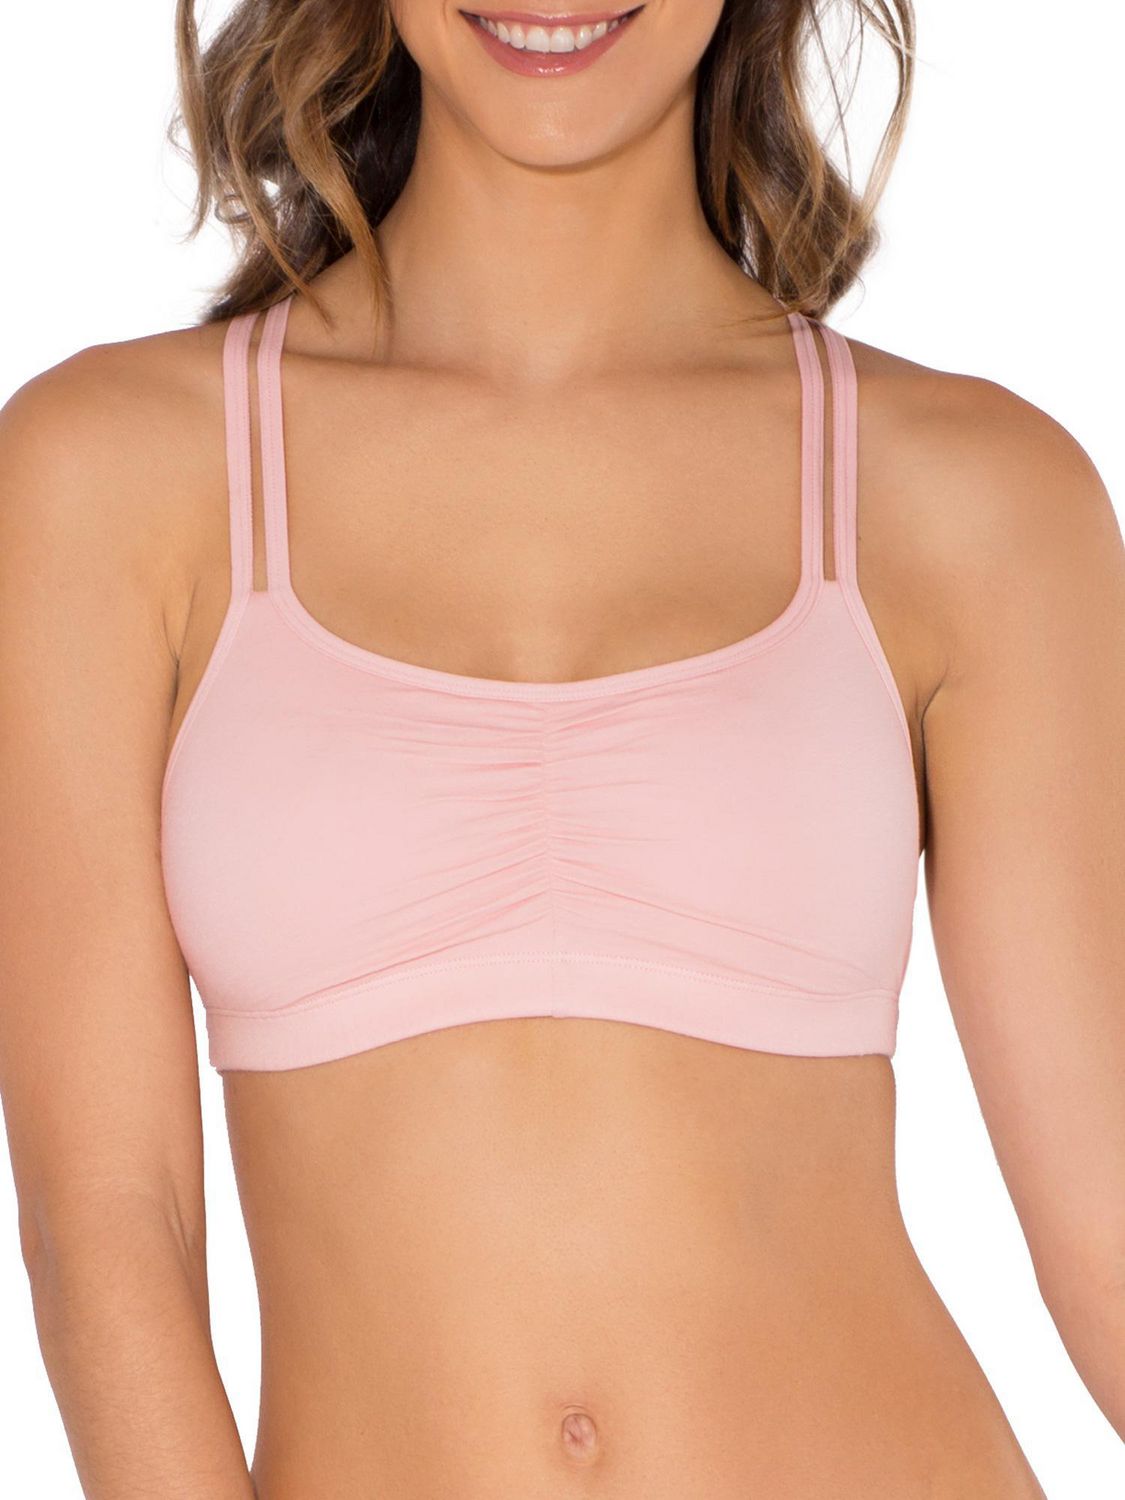 3-Pack Fruit of the Loom Womens Spaghetti Strap Cotton Pullover Sports Bra 